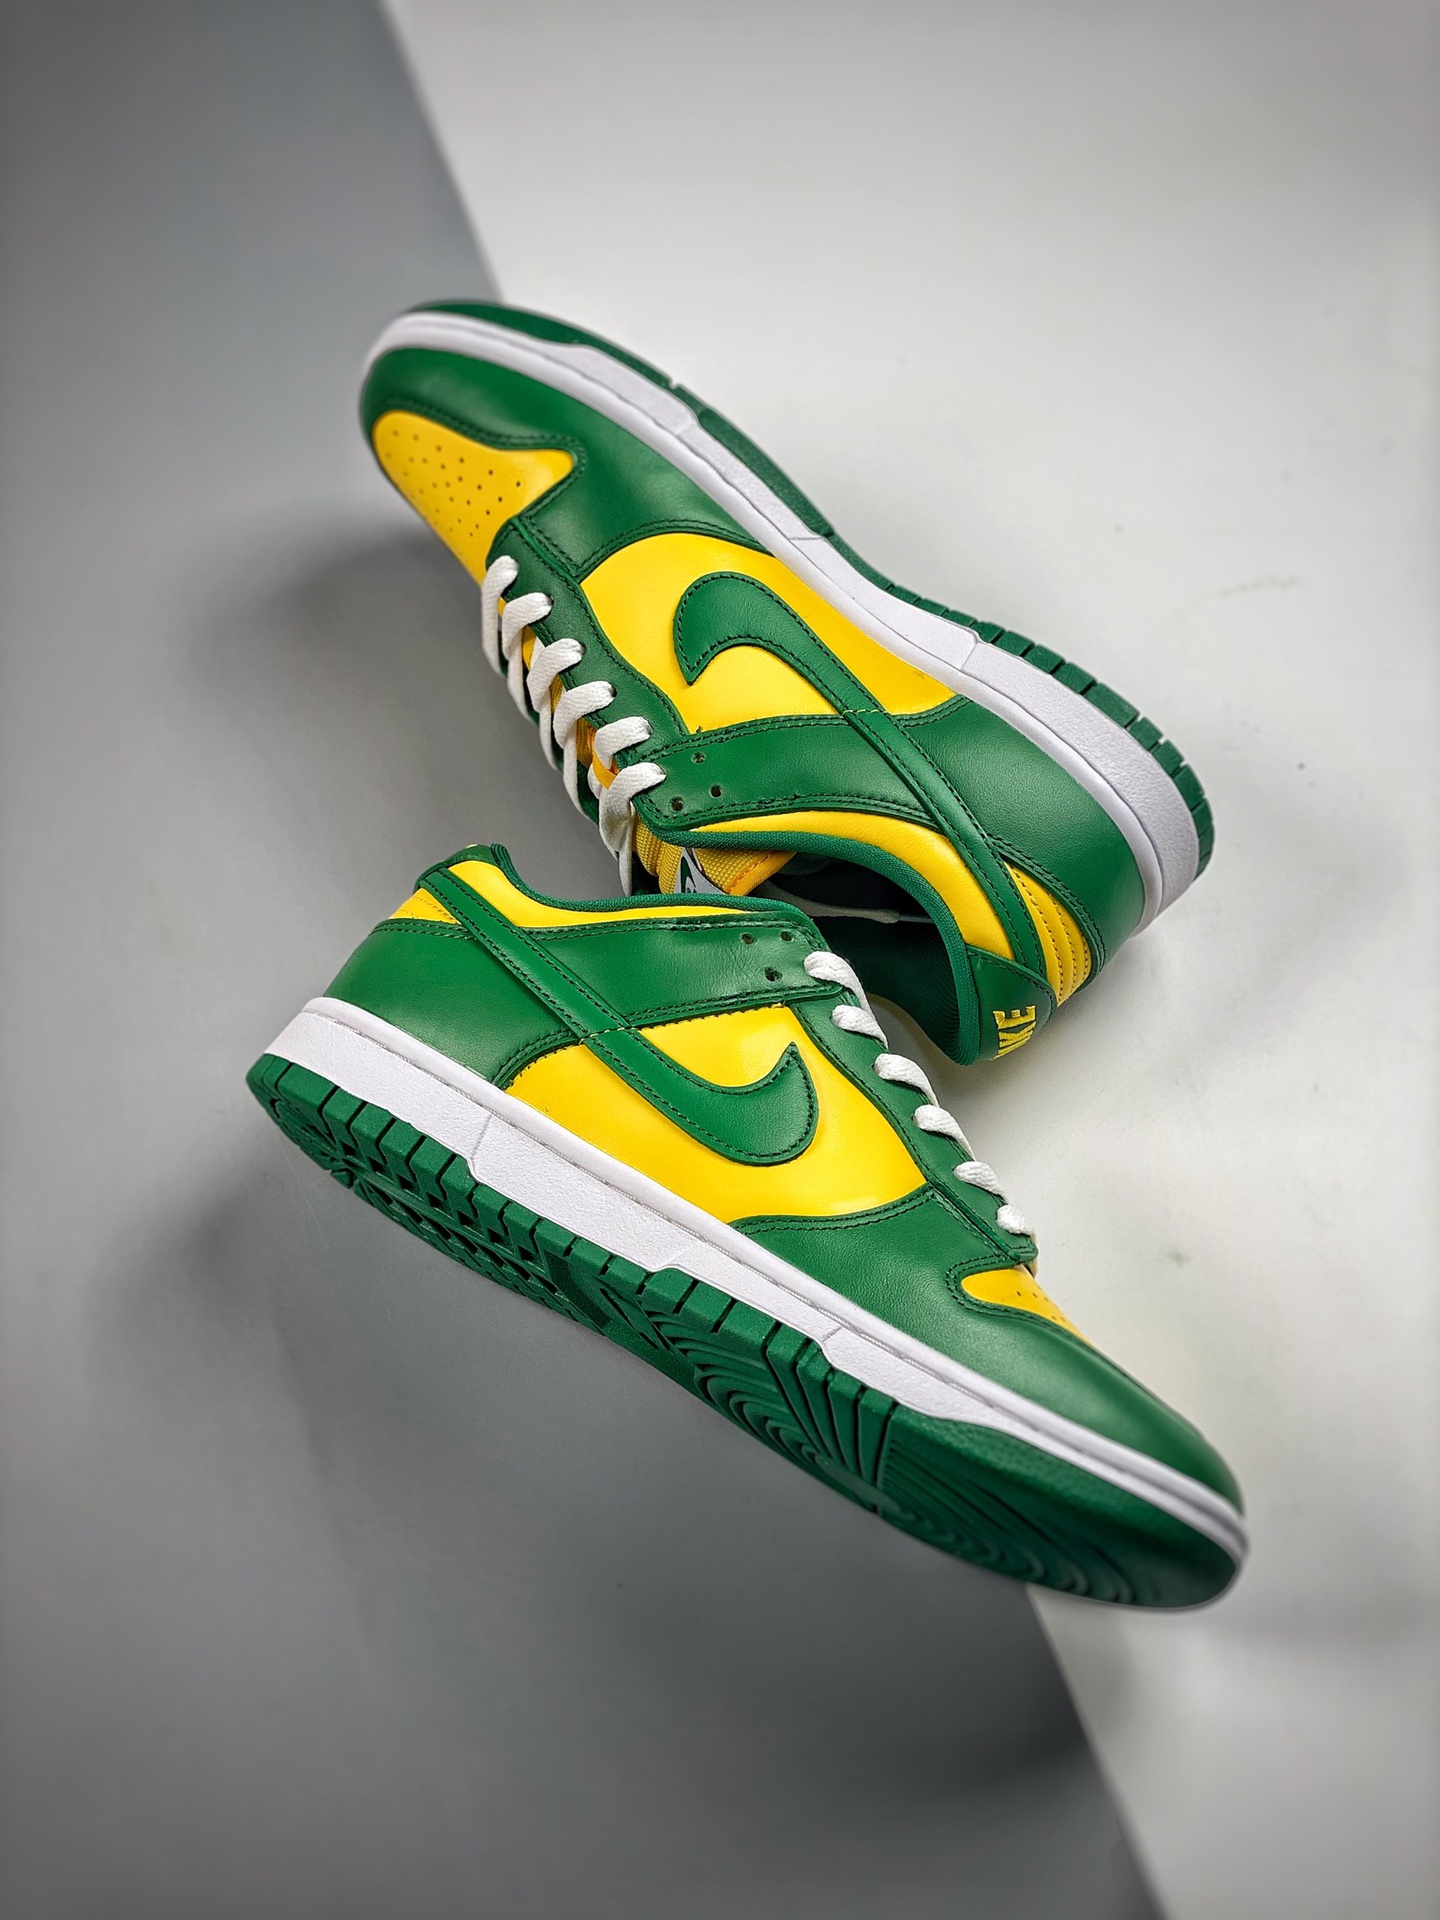 Dunk Low 'Pine Green and Varsity Maize' (CU1727-700) Release Date